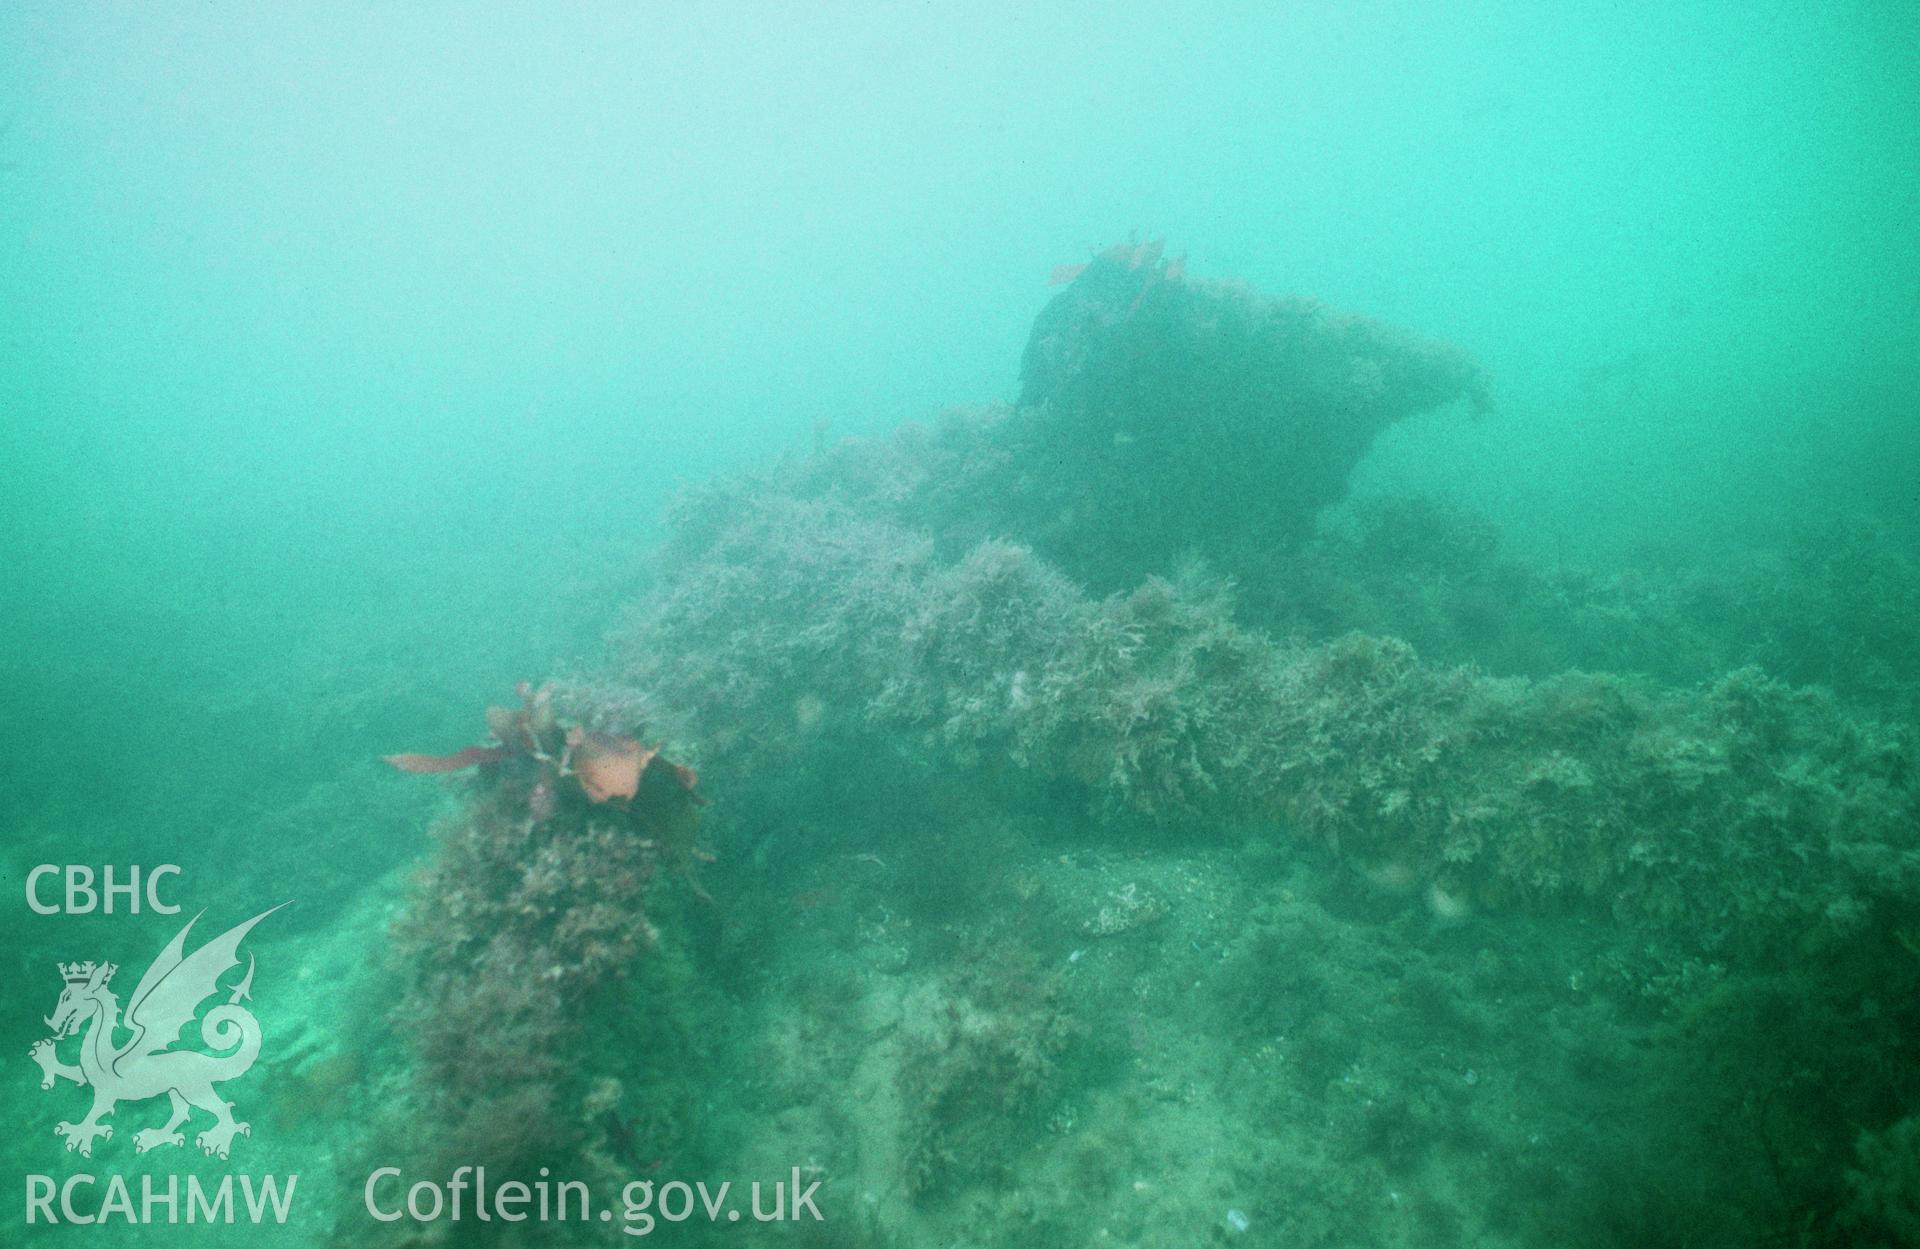 View showing flukes of the ship's iron anchor, one of a set of 41 colour slides from an underwater survey of the Tal-y-Bont designated shipwreck, carried out by the Archaeological Diving Unit.